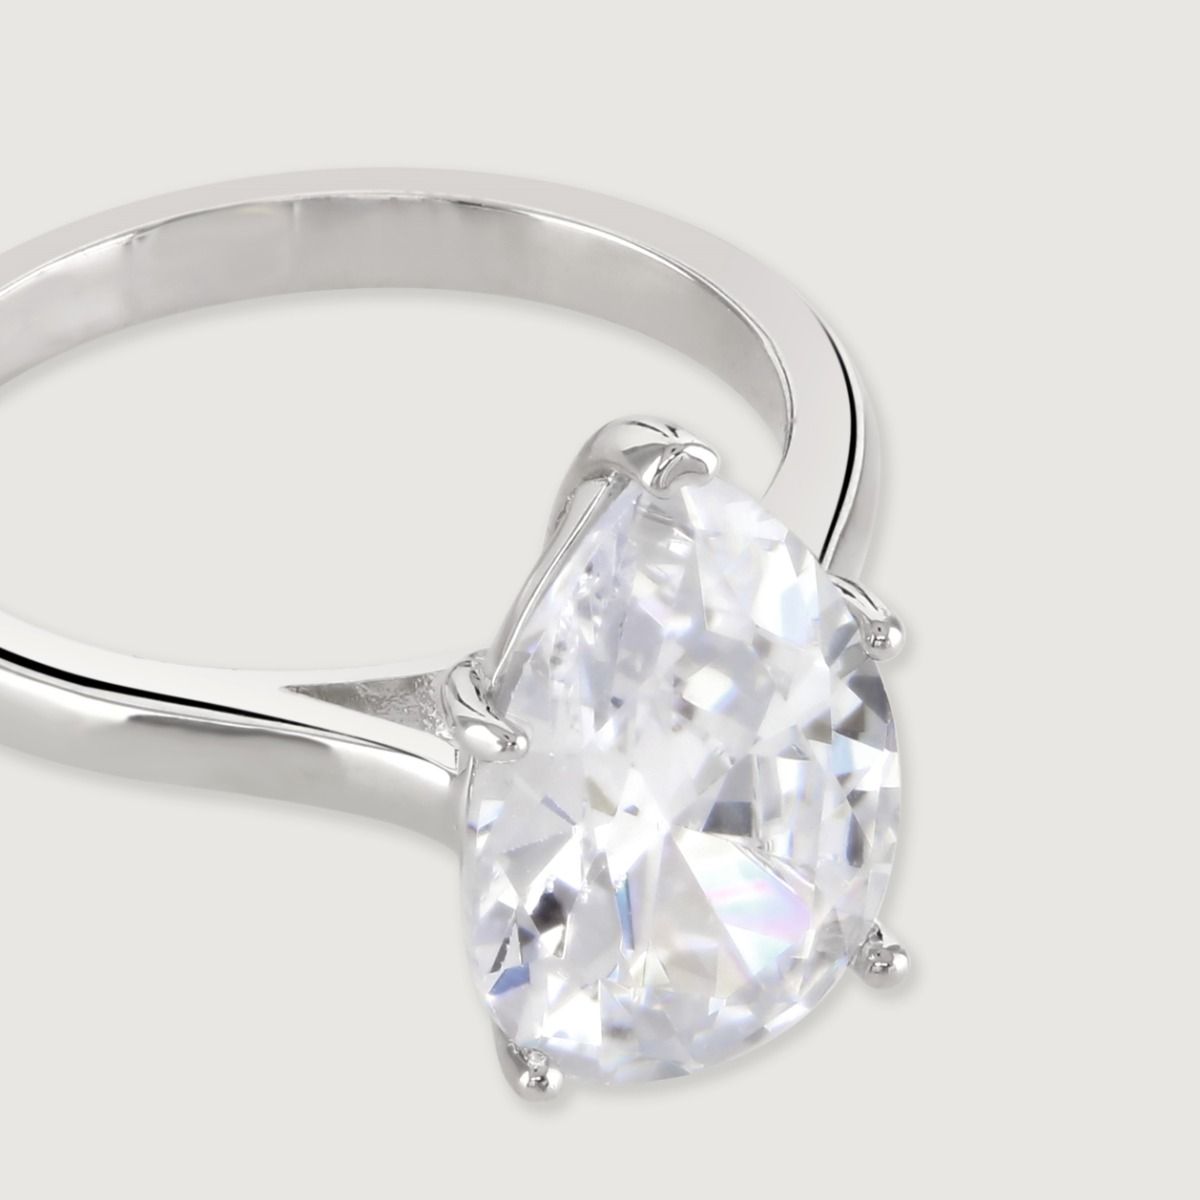 Timeless and elegant, this simply stunning solitaire ring features a pear cut cubic zirconia at it’s centre on a band of cool, polished rhodium plating. An ultimate classic, perfect for any occasion.